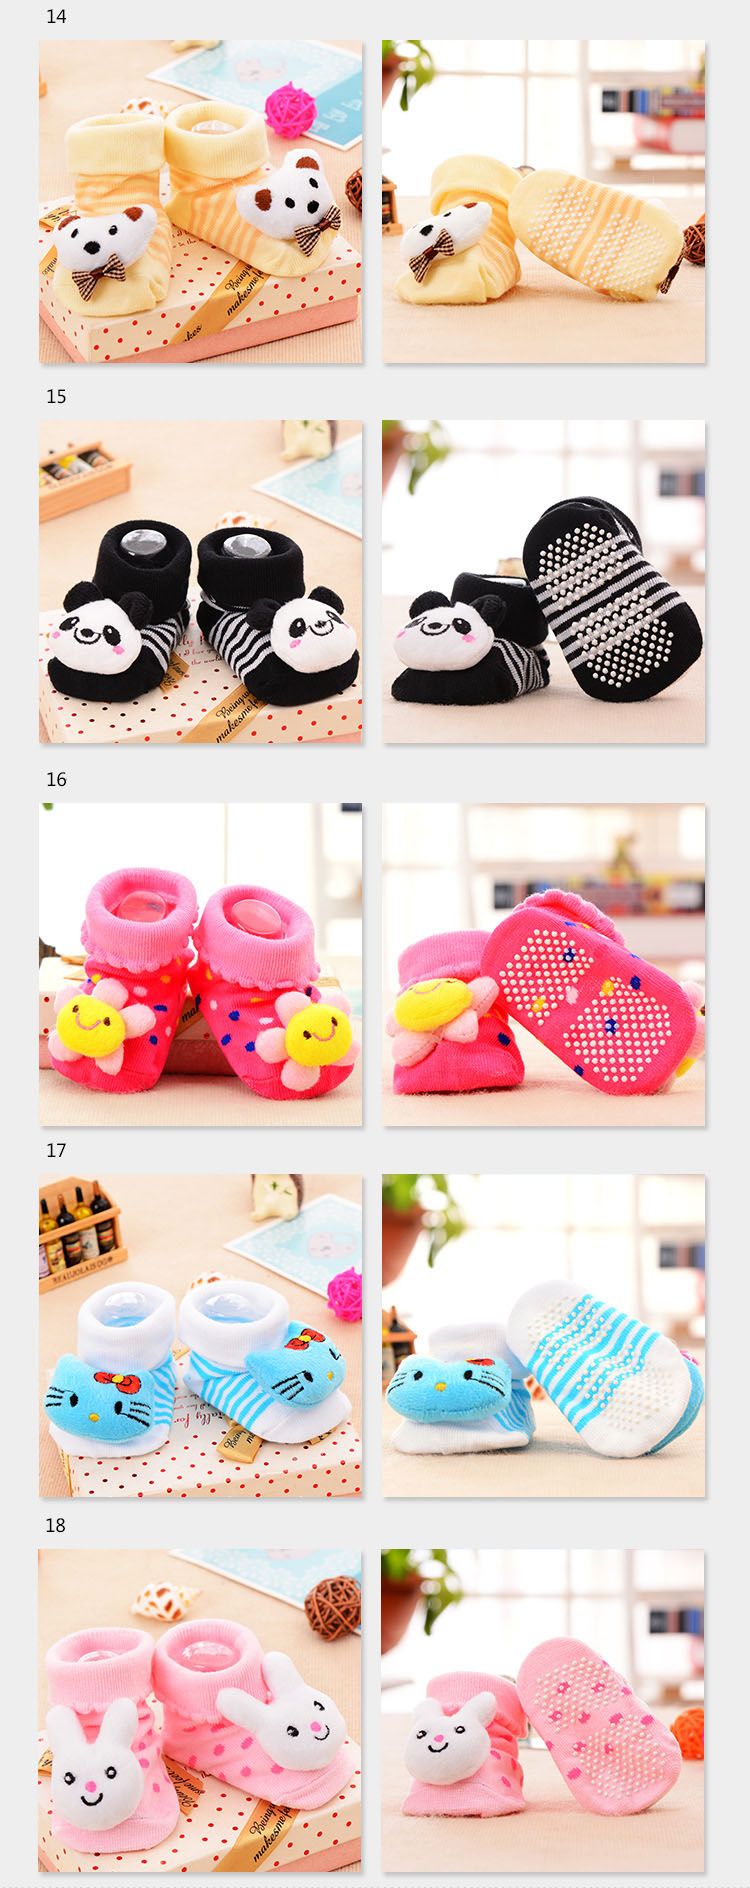 newborn baby shoes size 0